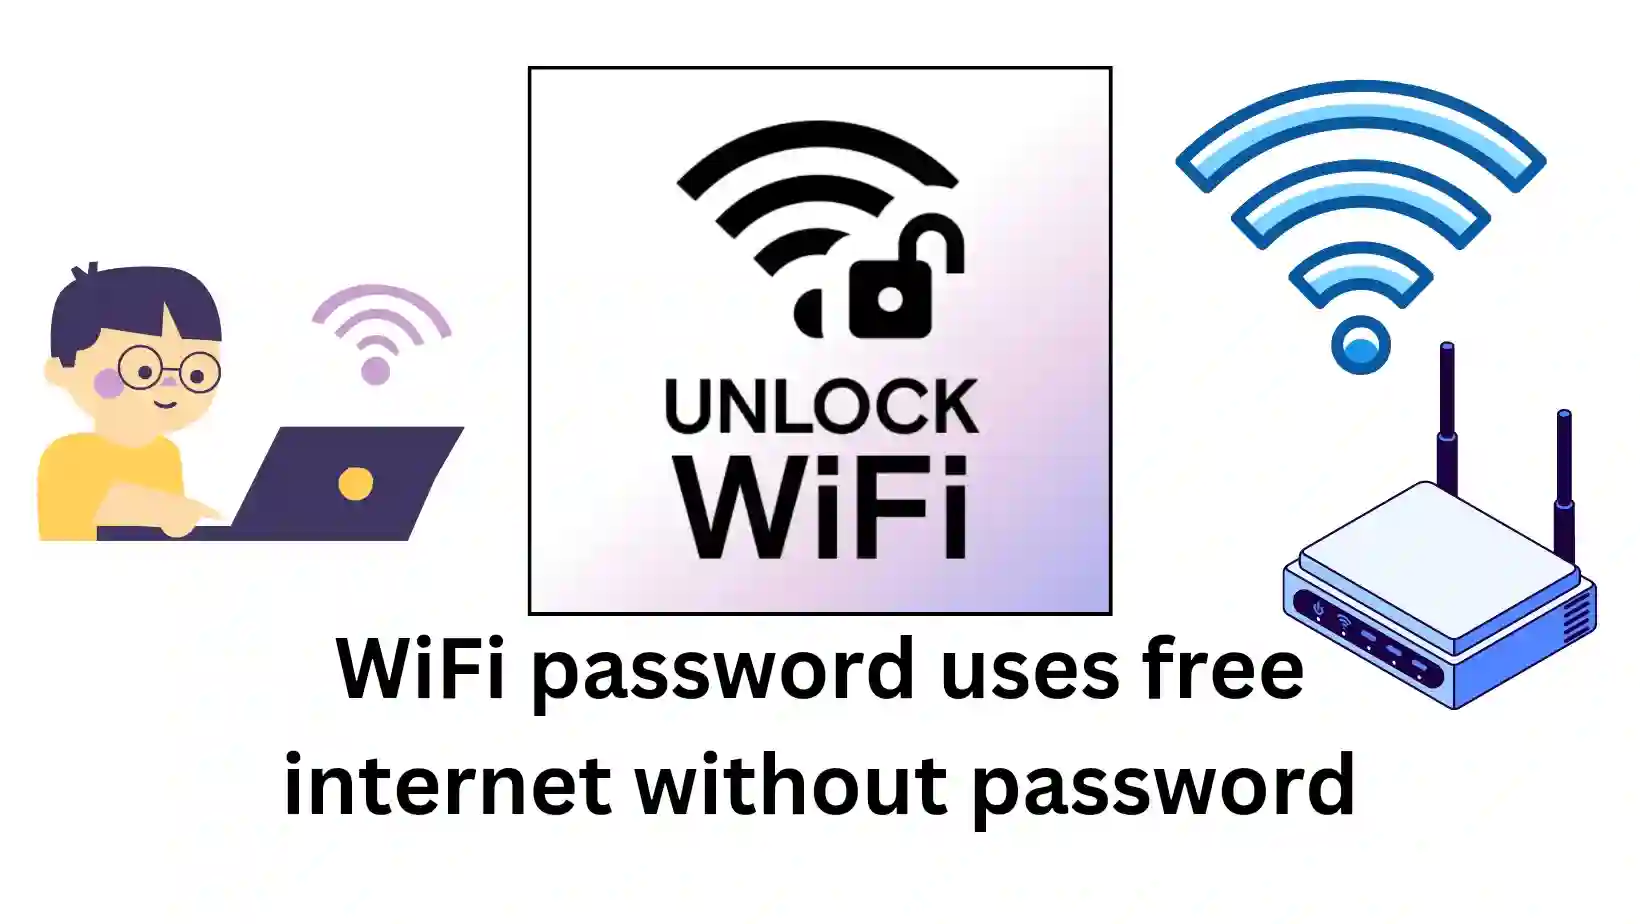 WiFi password uses free internet without password